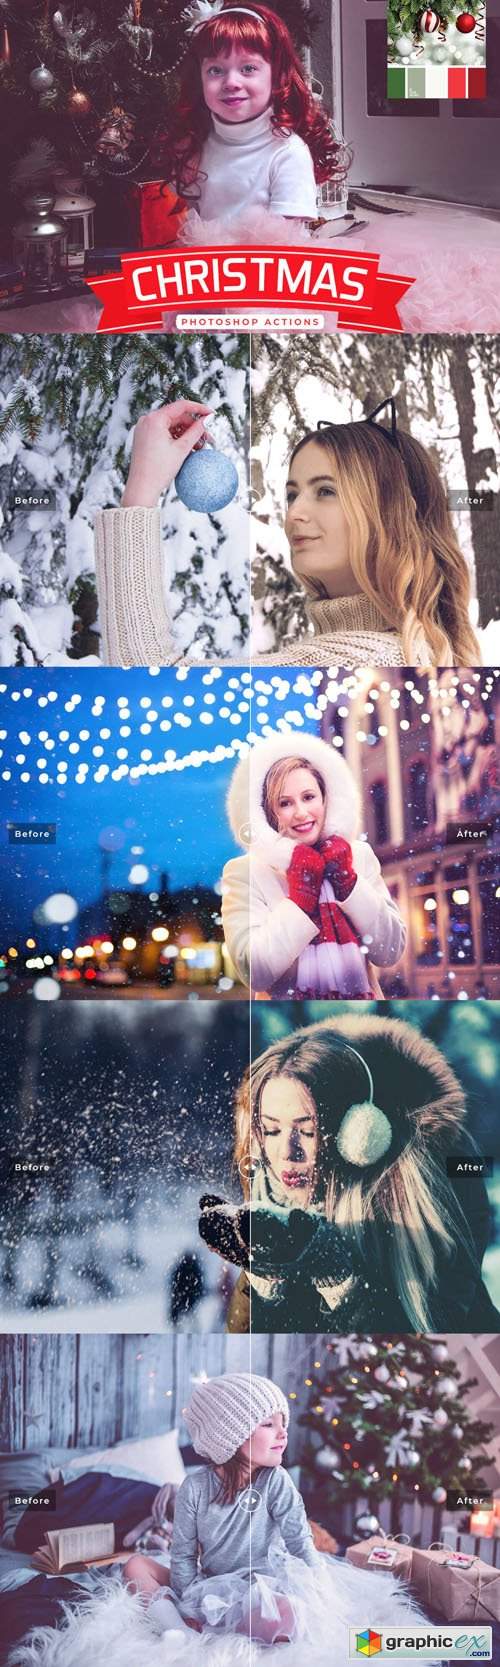 6 Christmas Photoshop Actions